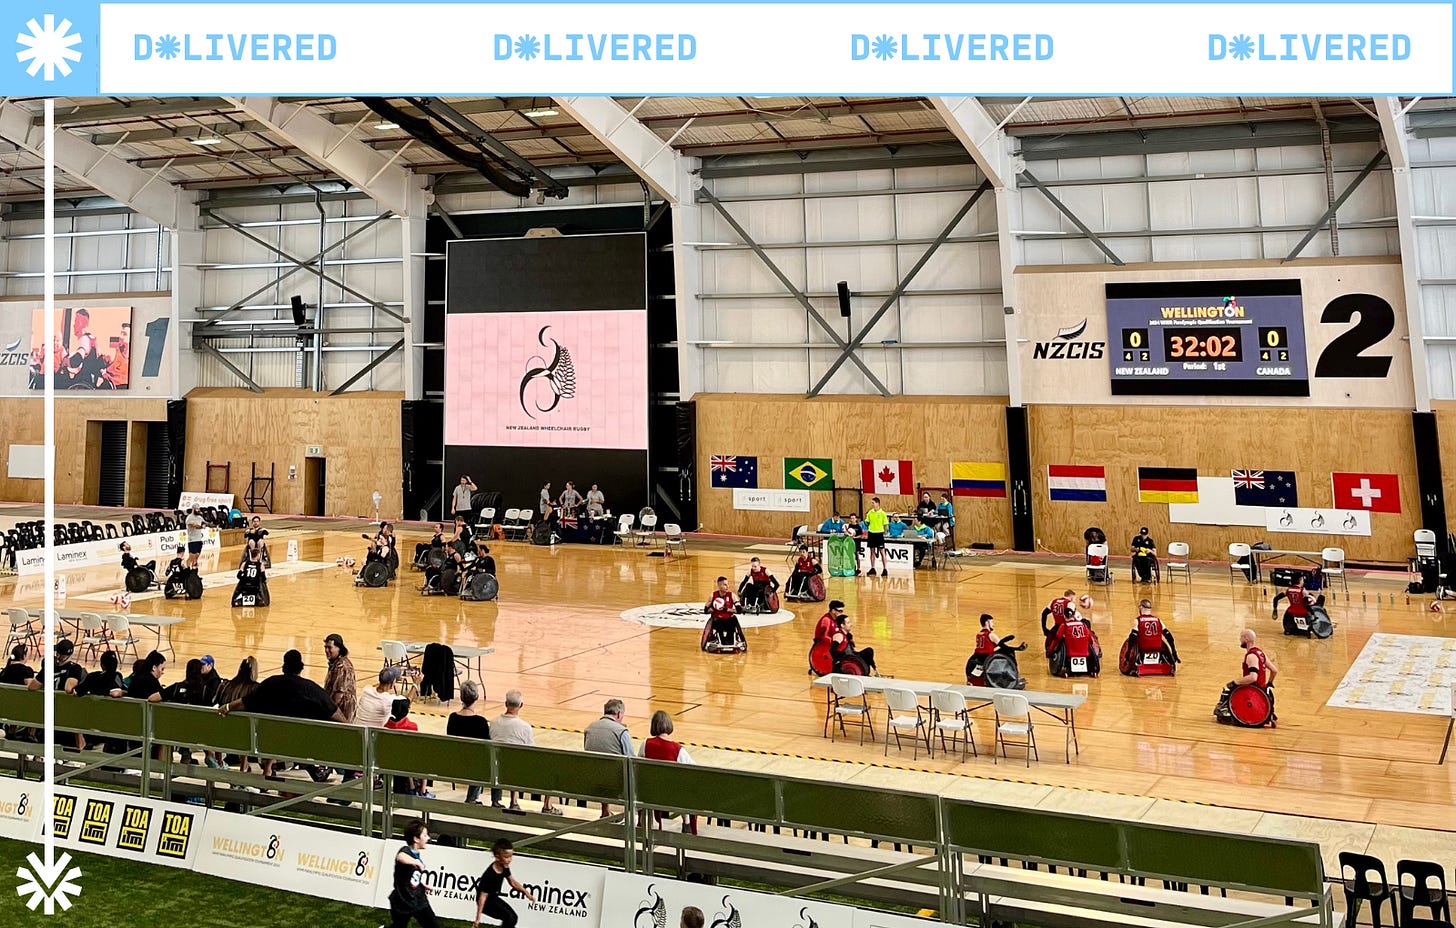 Image description: An indoor sports court with the New Zealand and Canada wheelchair rugby teams 